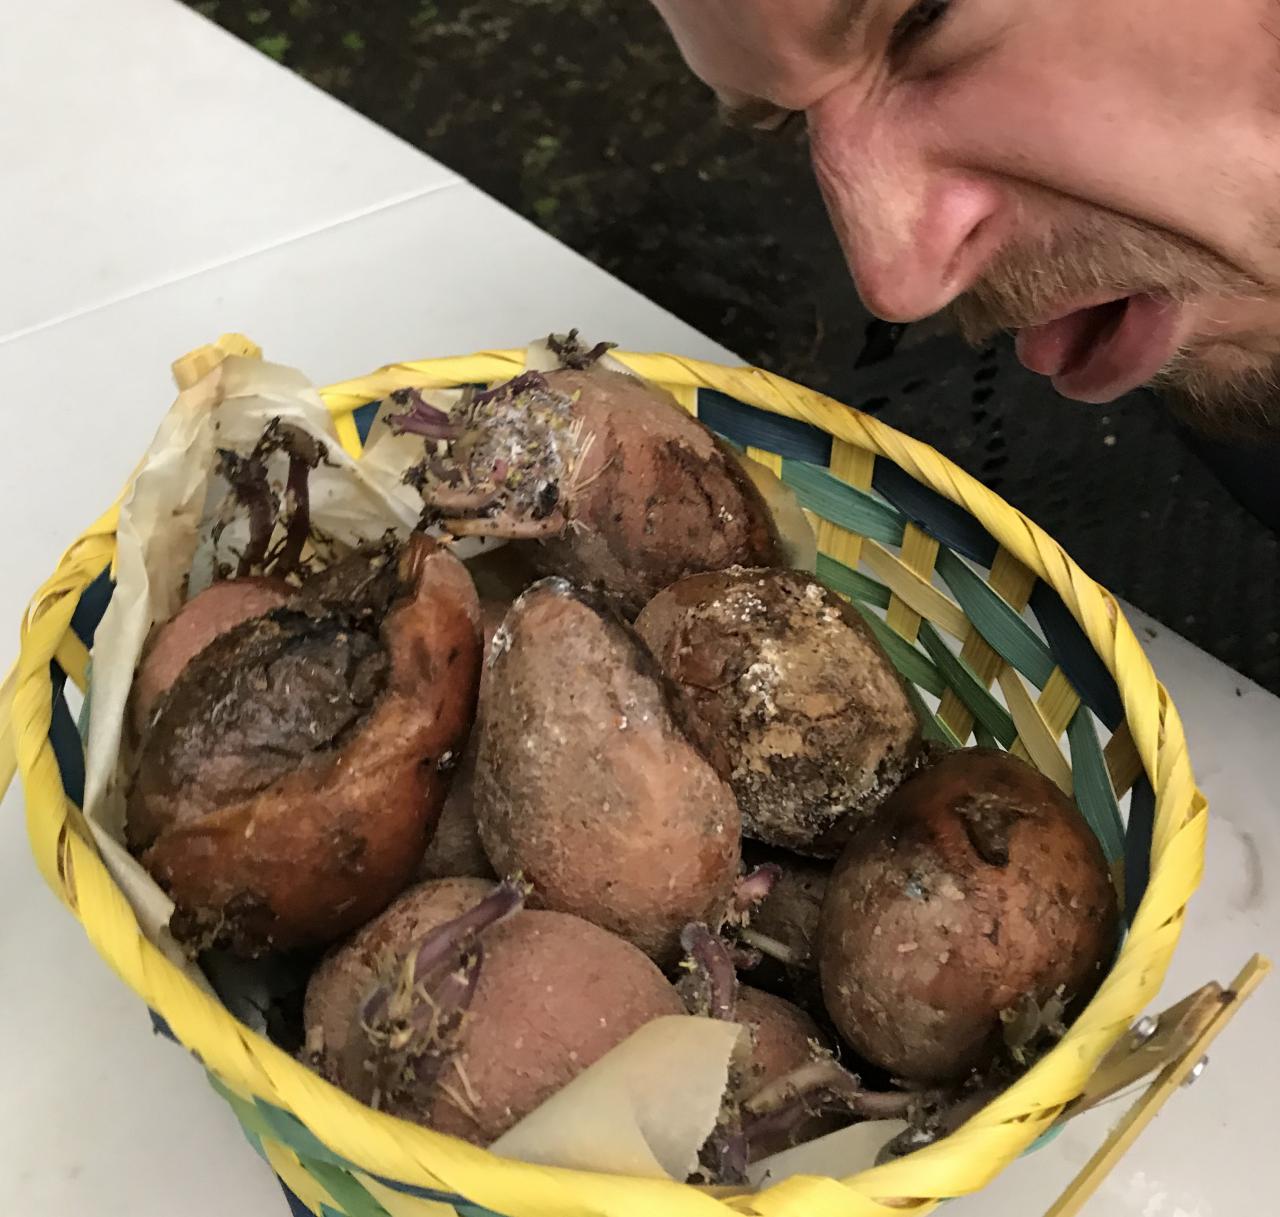 National Potato Giant Uses Obscure Leasing Scheme To Skirt Environmental  Oversight in Minnesota